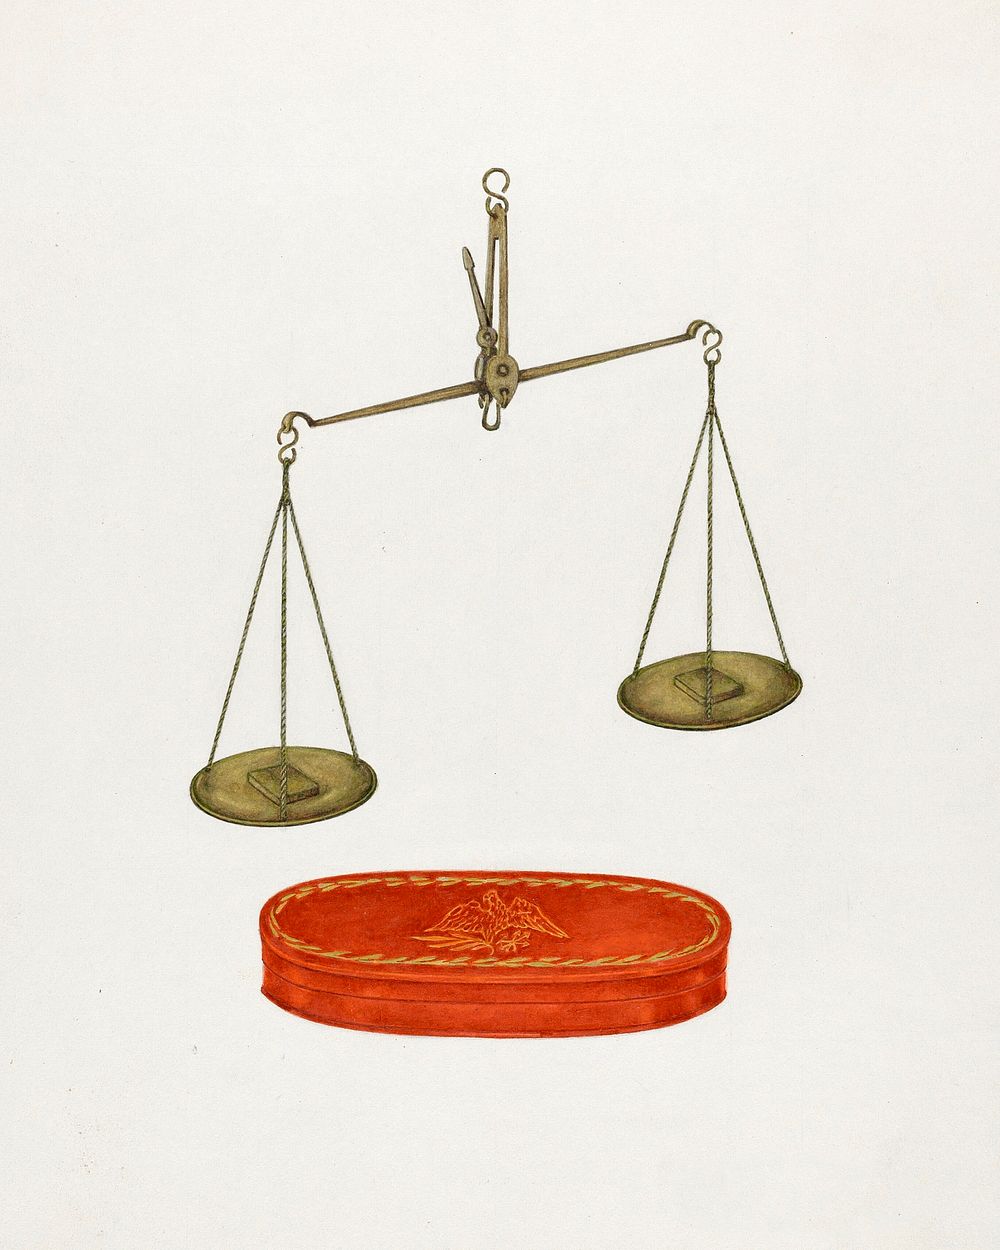 Shaker Scales (ca.1938) by George V. Vezolles. Original from The National Gallery of Art. Digitally enhanced by rawpixel.